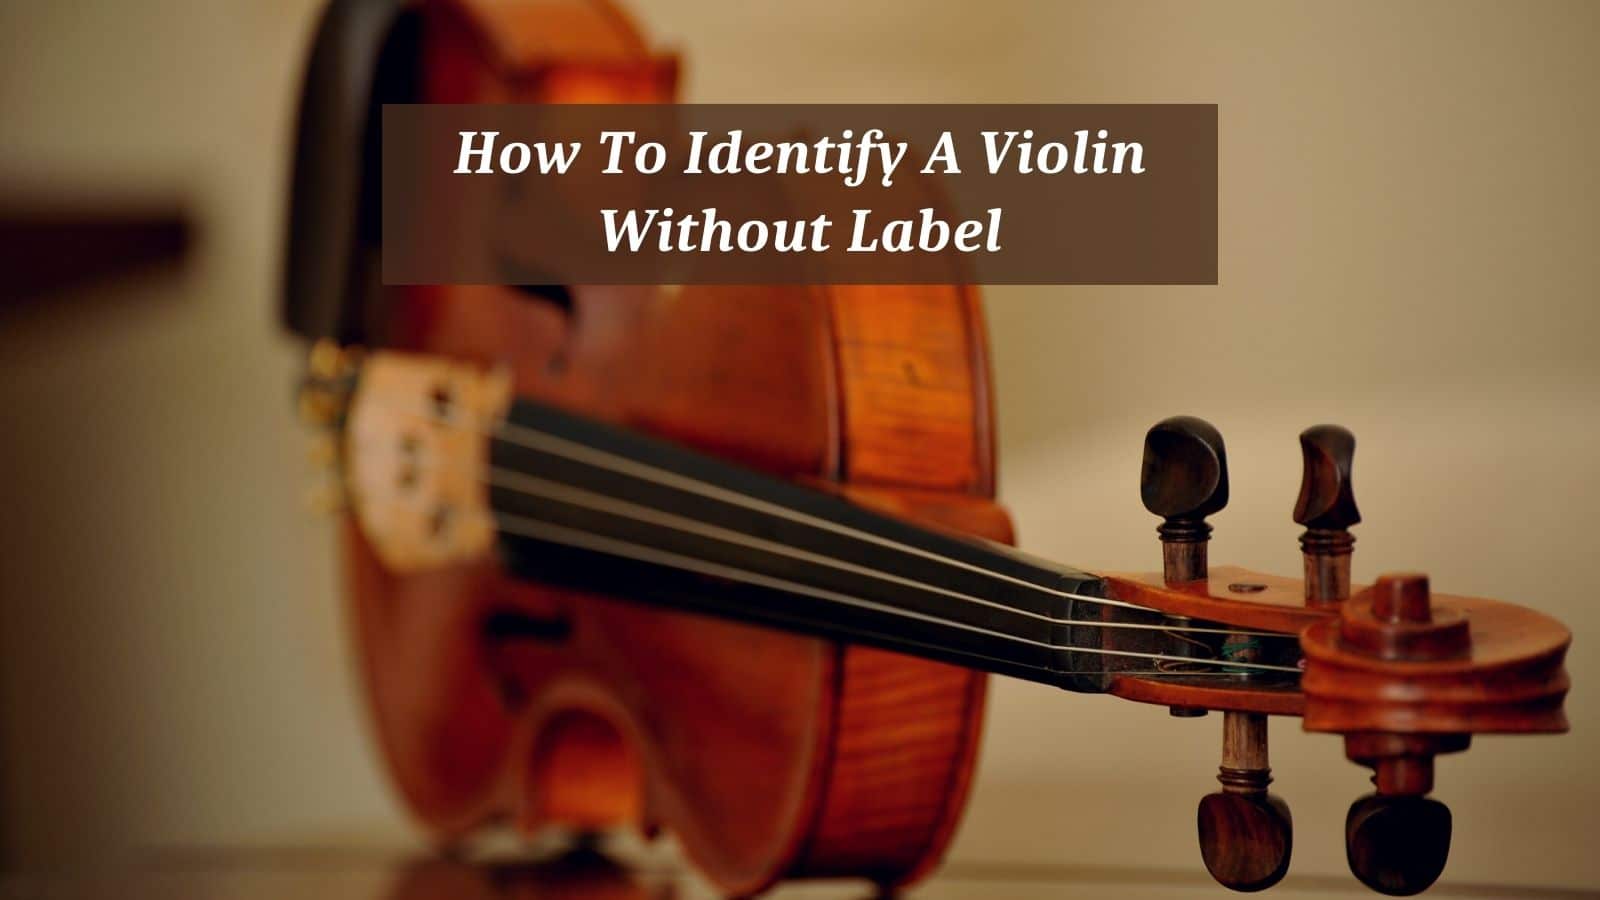 How To Identify A Violin Without Label